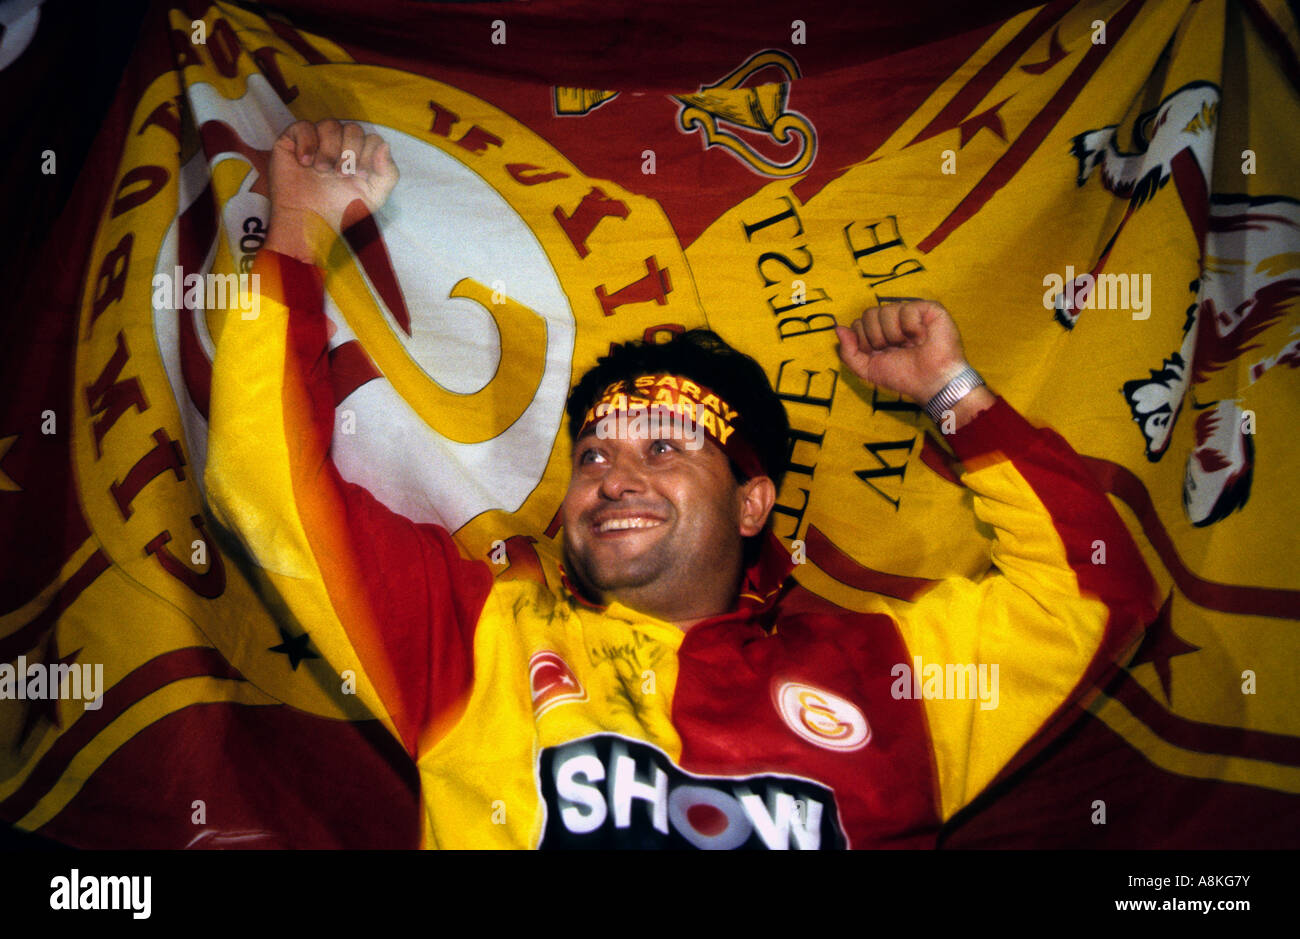 A Galatasaray football fan celebrates a goal against local rivals Fenerbahce in Istanbul, Turkey. Stock Photo